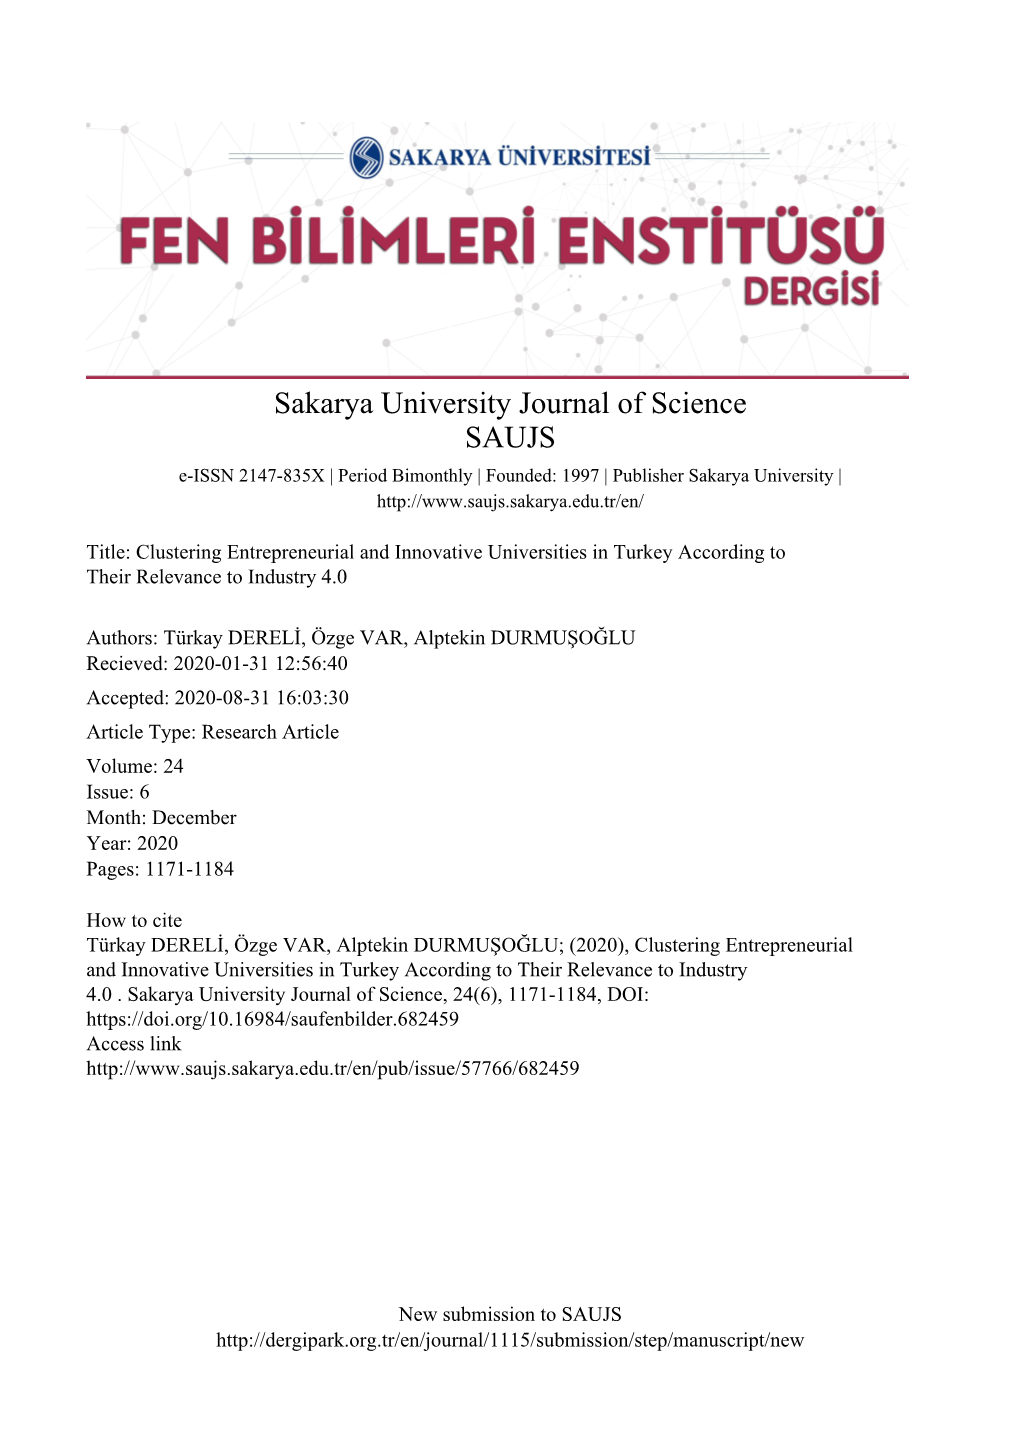 Clustering Entrepreneurial and Innovative Universities in Turkey According to Their Relevance to Industry 4.0